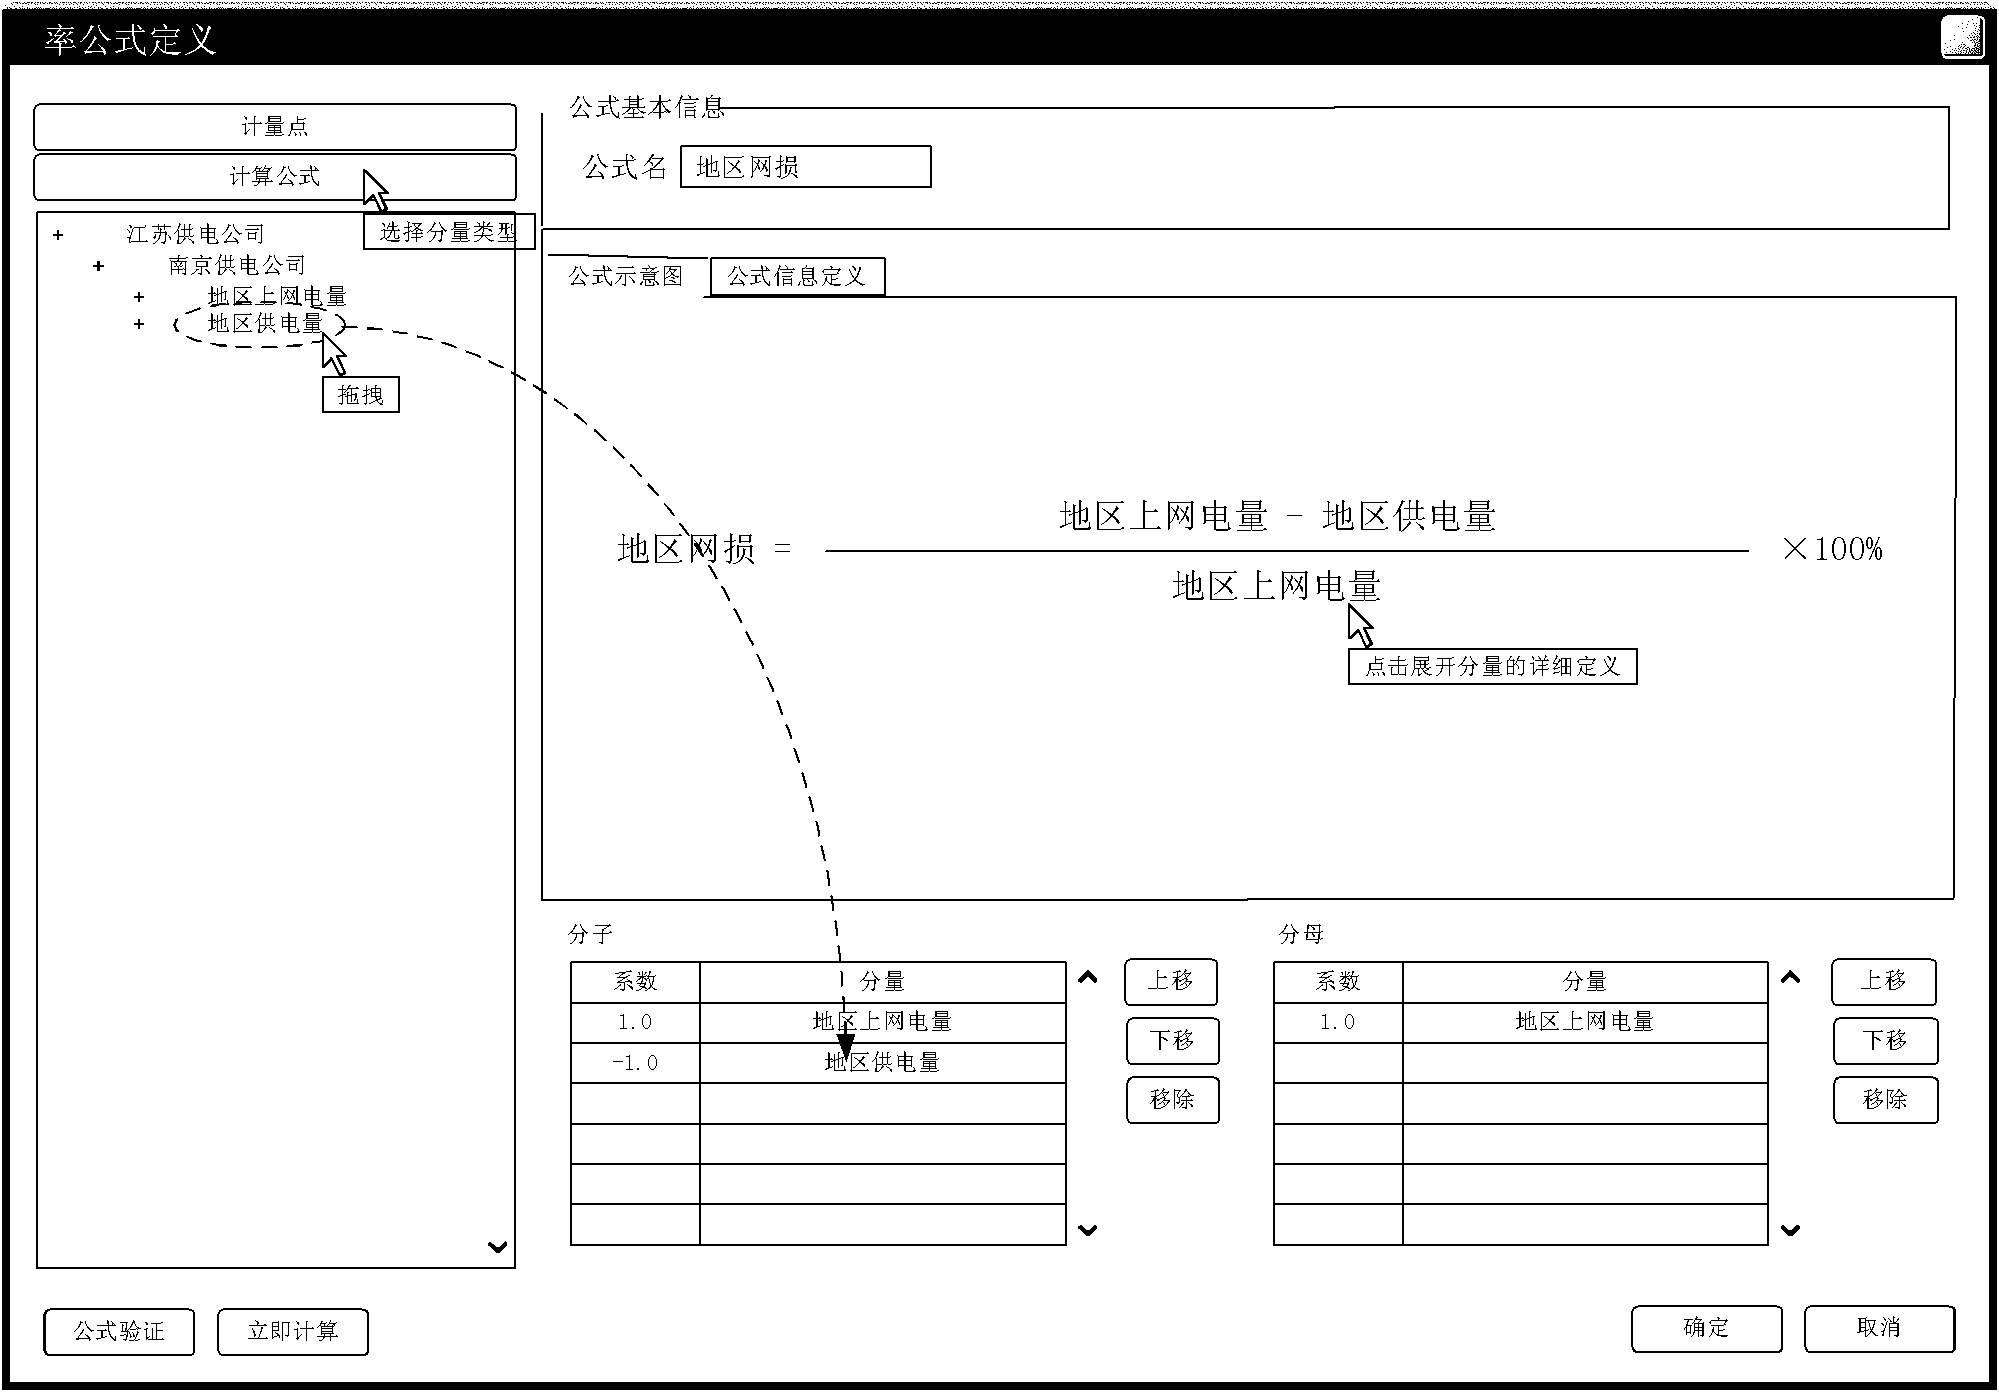 System for visual configuration of power formula